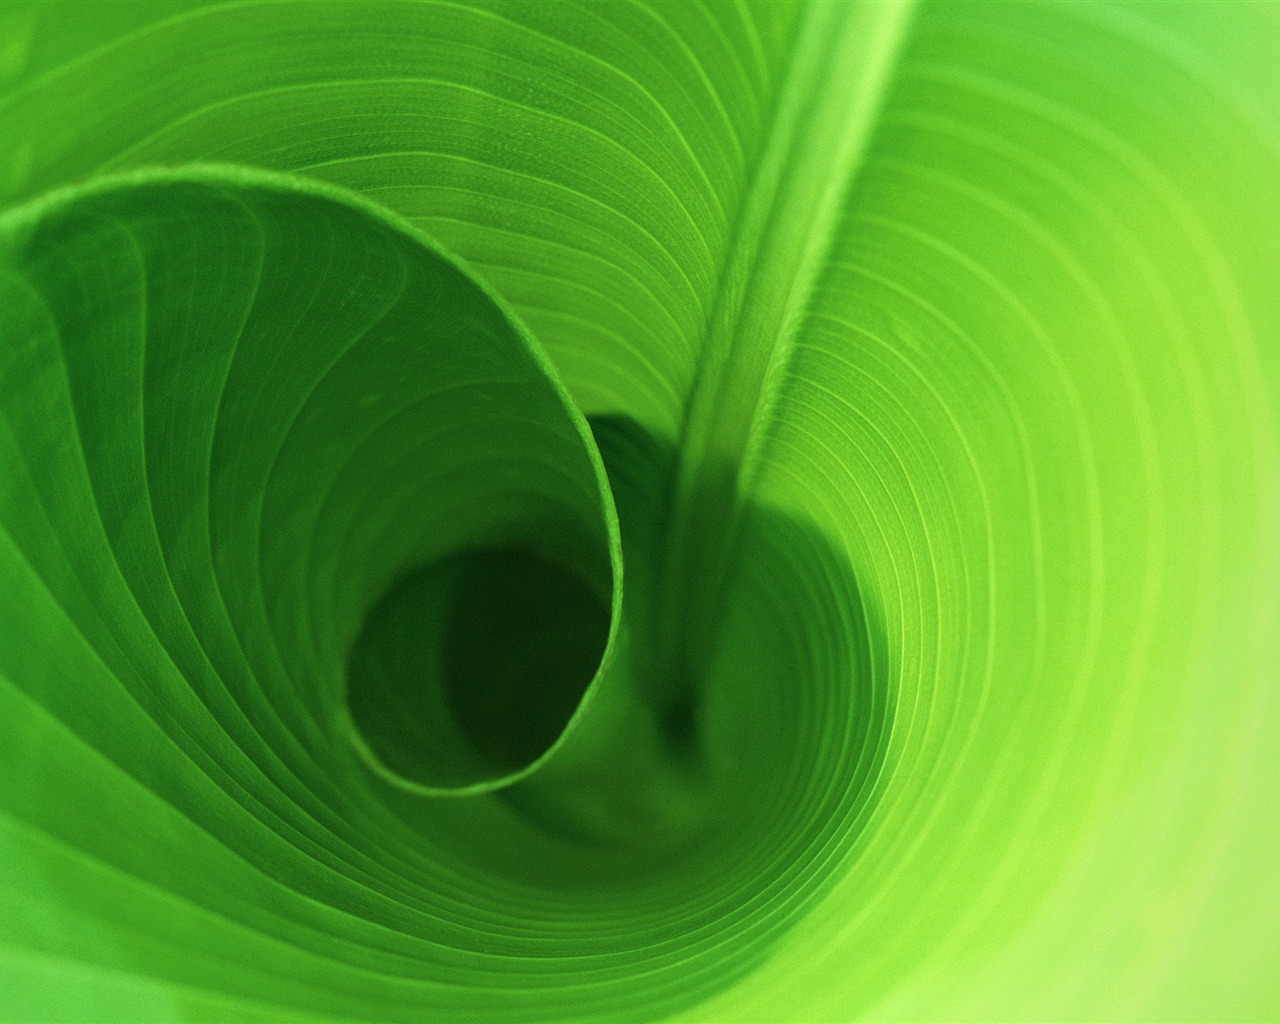 Large green leaves close-up flower wallpaper (2) #3 - 1280x1024